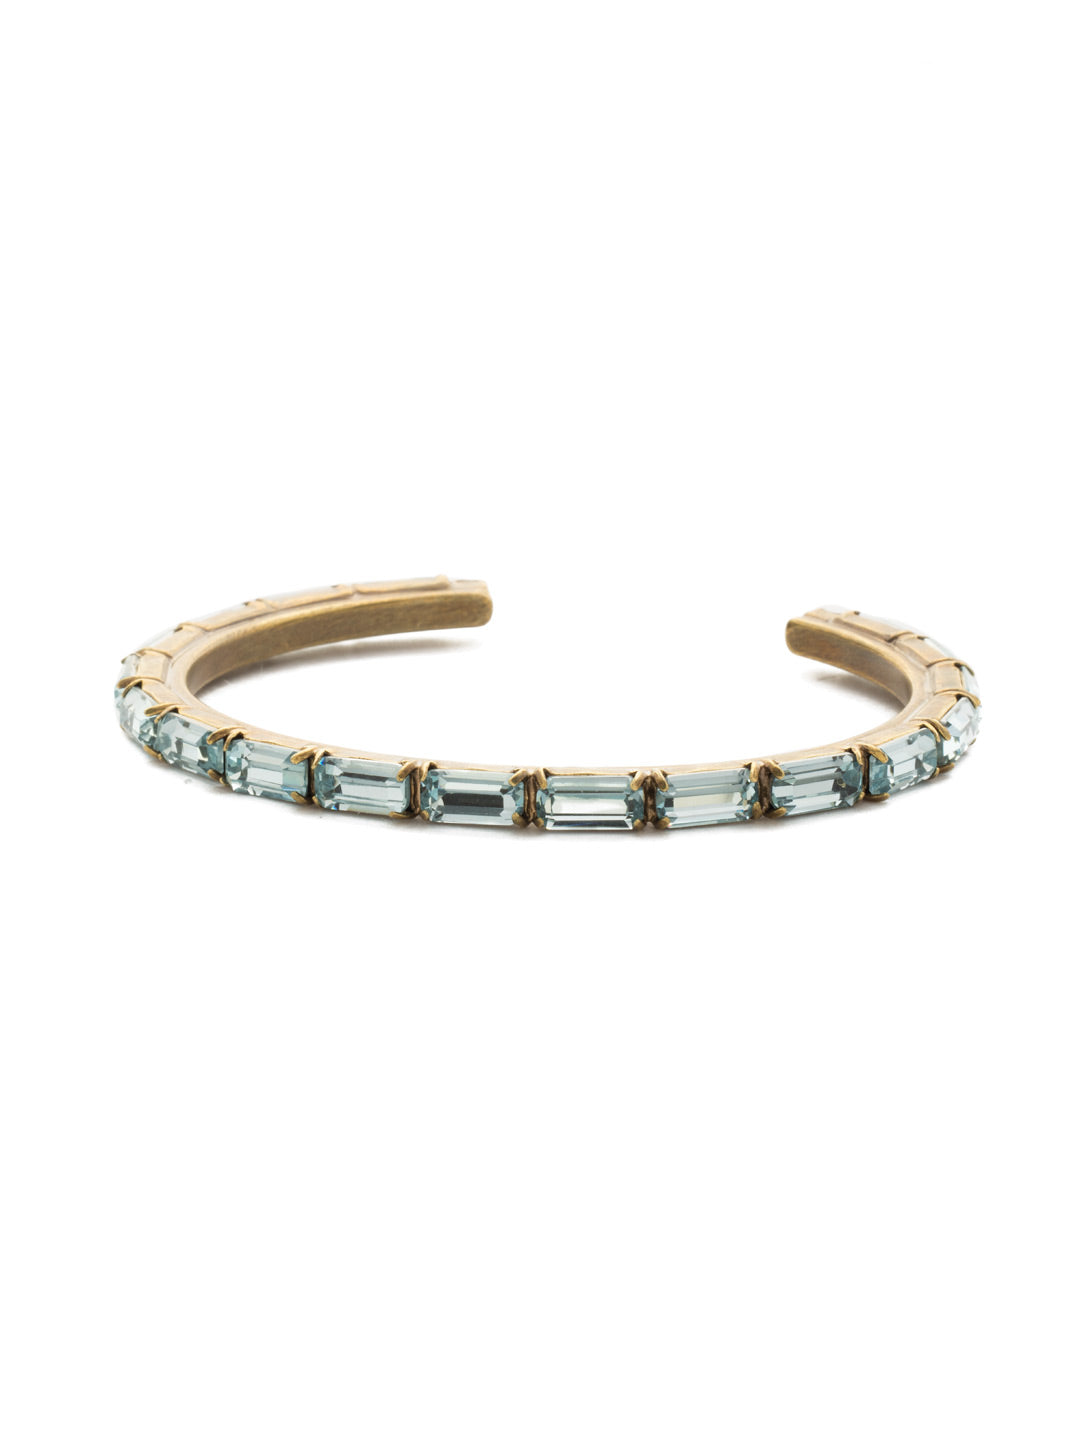 Brilliant Baguette Cuff Bracelet - BDK49AGLAQ - <p>This cuff bracelet features repeating crystal baguettes and can be mixed and matched in a myriad of ways. From Sorrelli's Light Aqua collection in our Antique Gold-tone finish.</p>